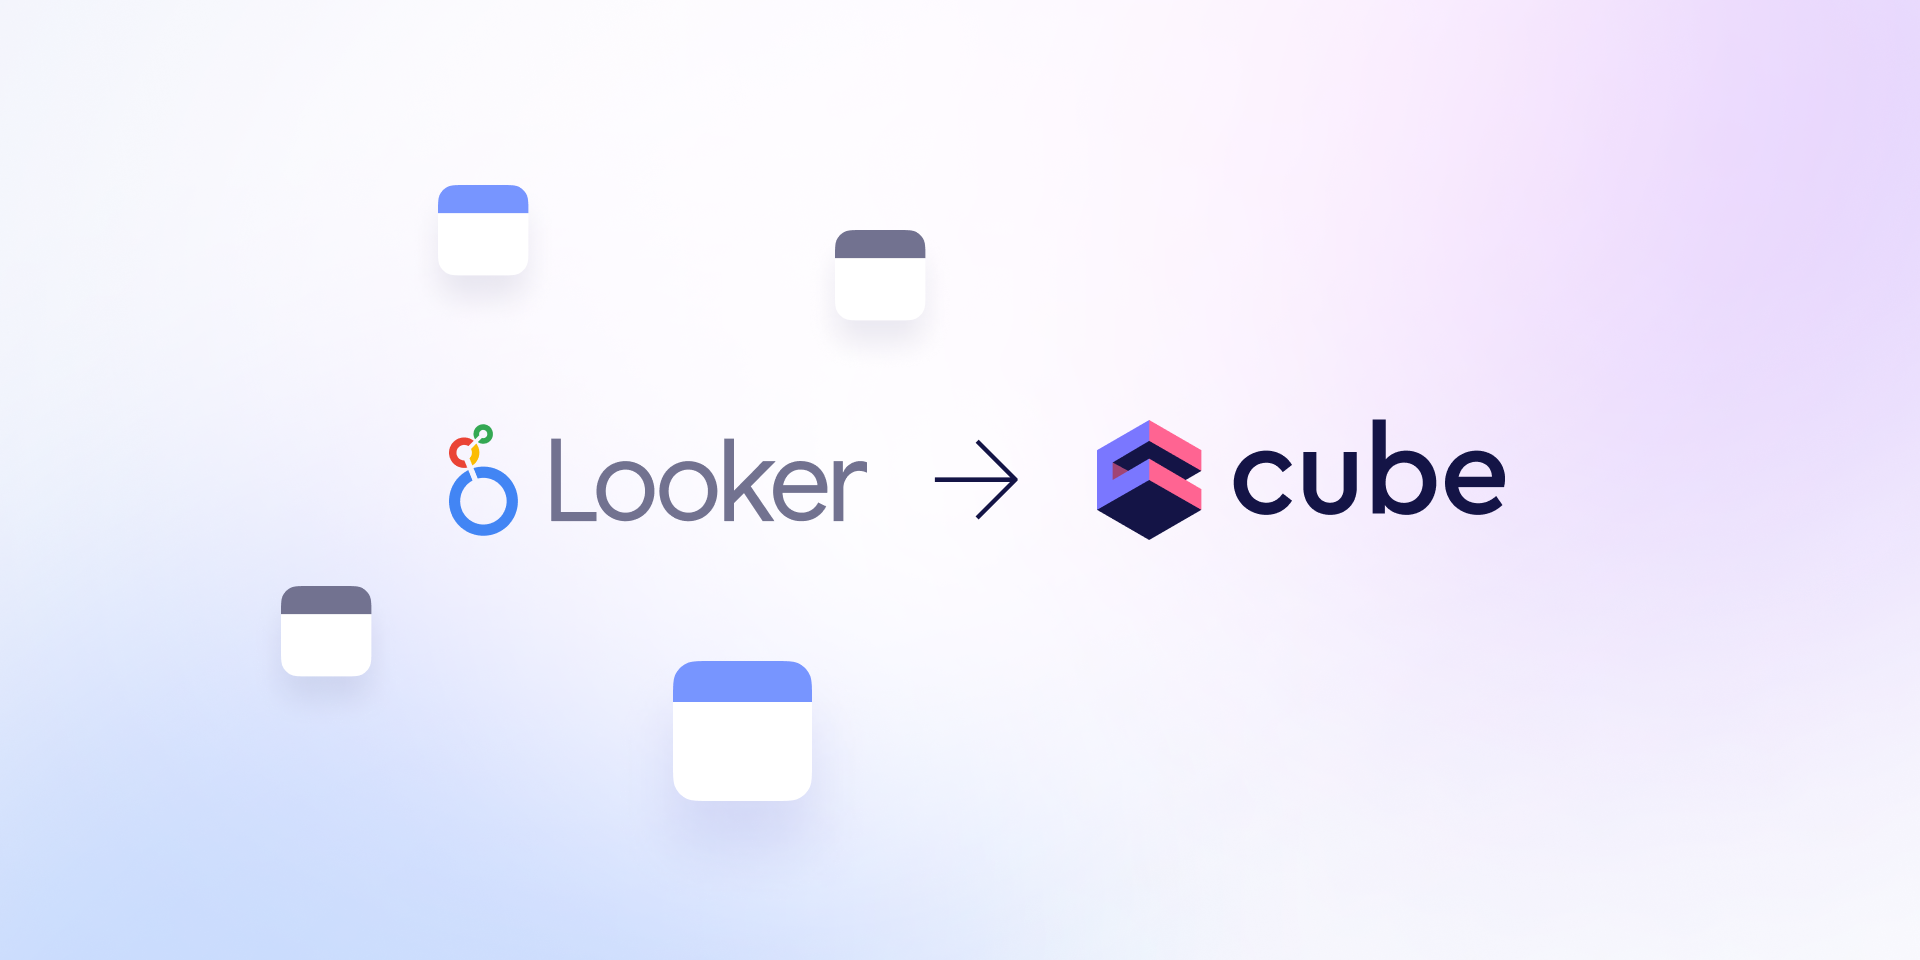 Cover of the 'Introducing a tool for Looker to Cube migration' blog post